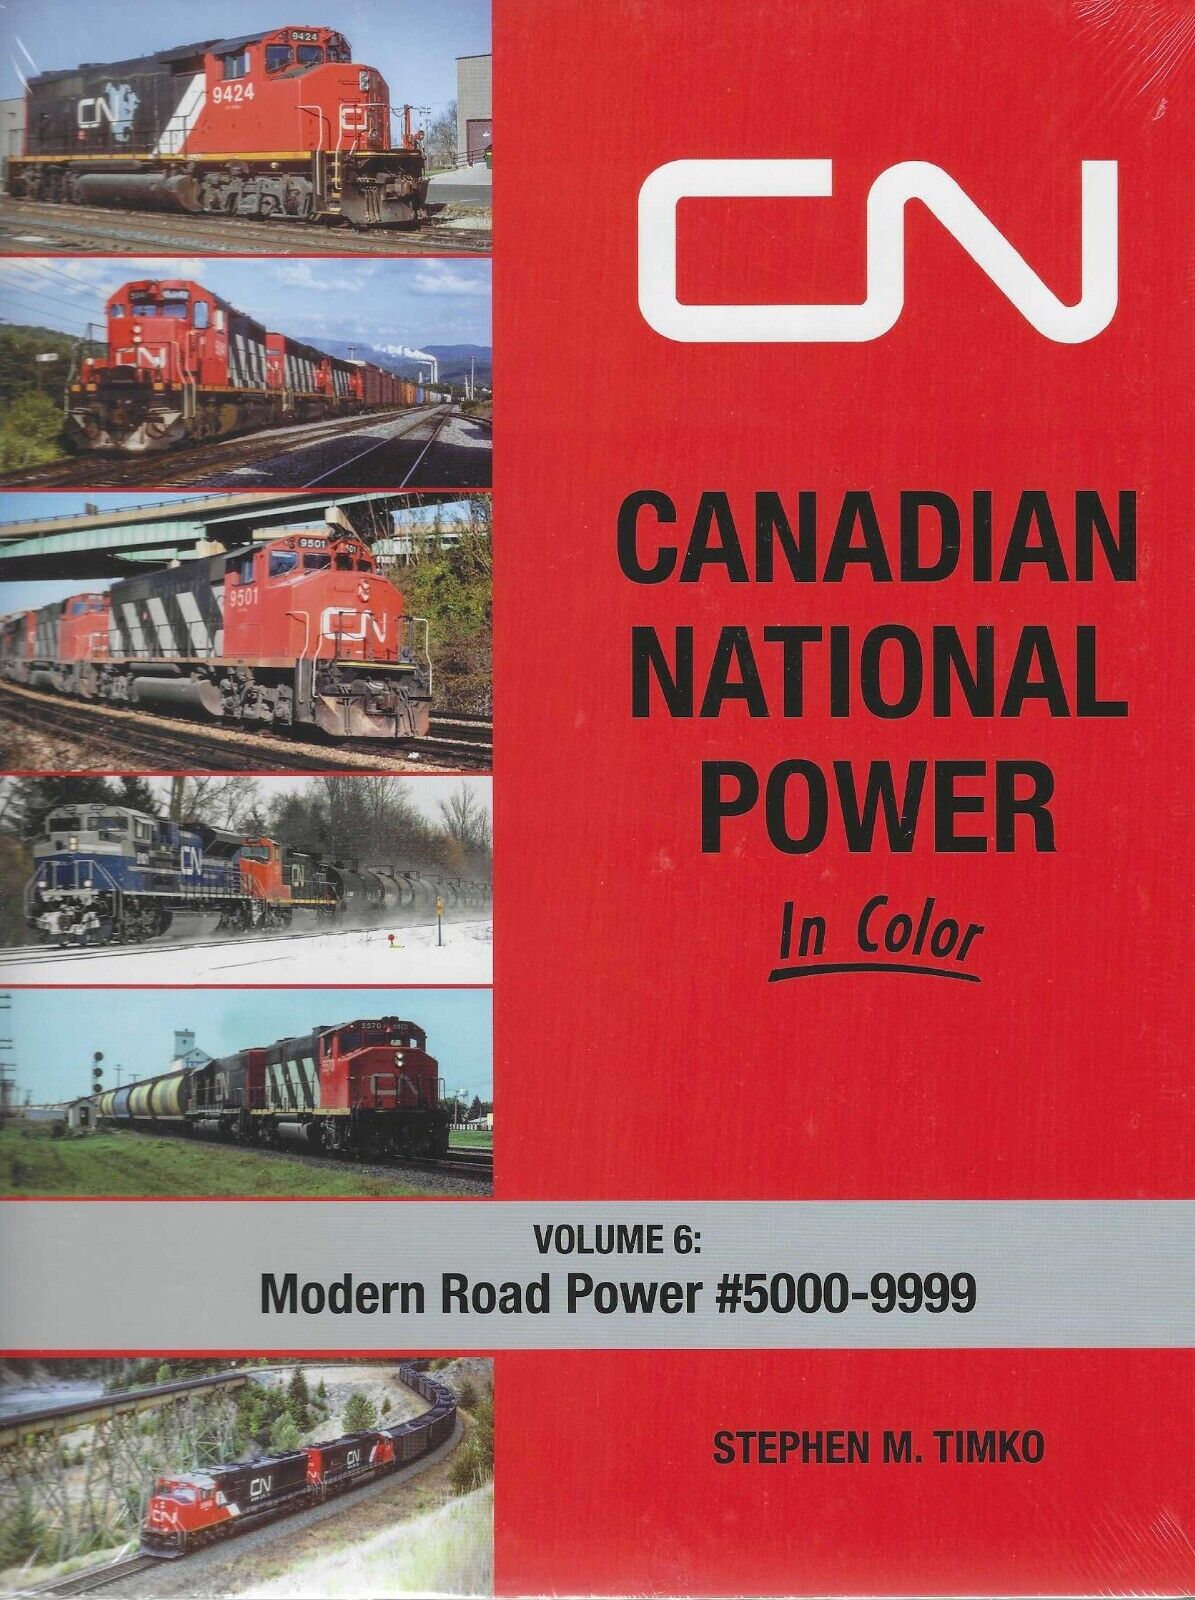 CANADIAN NATIONAL Power in Color, Vol. 6: Modern Road Power #5000-9999, NEW BOOK